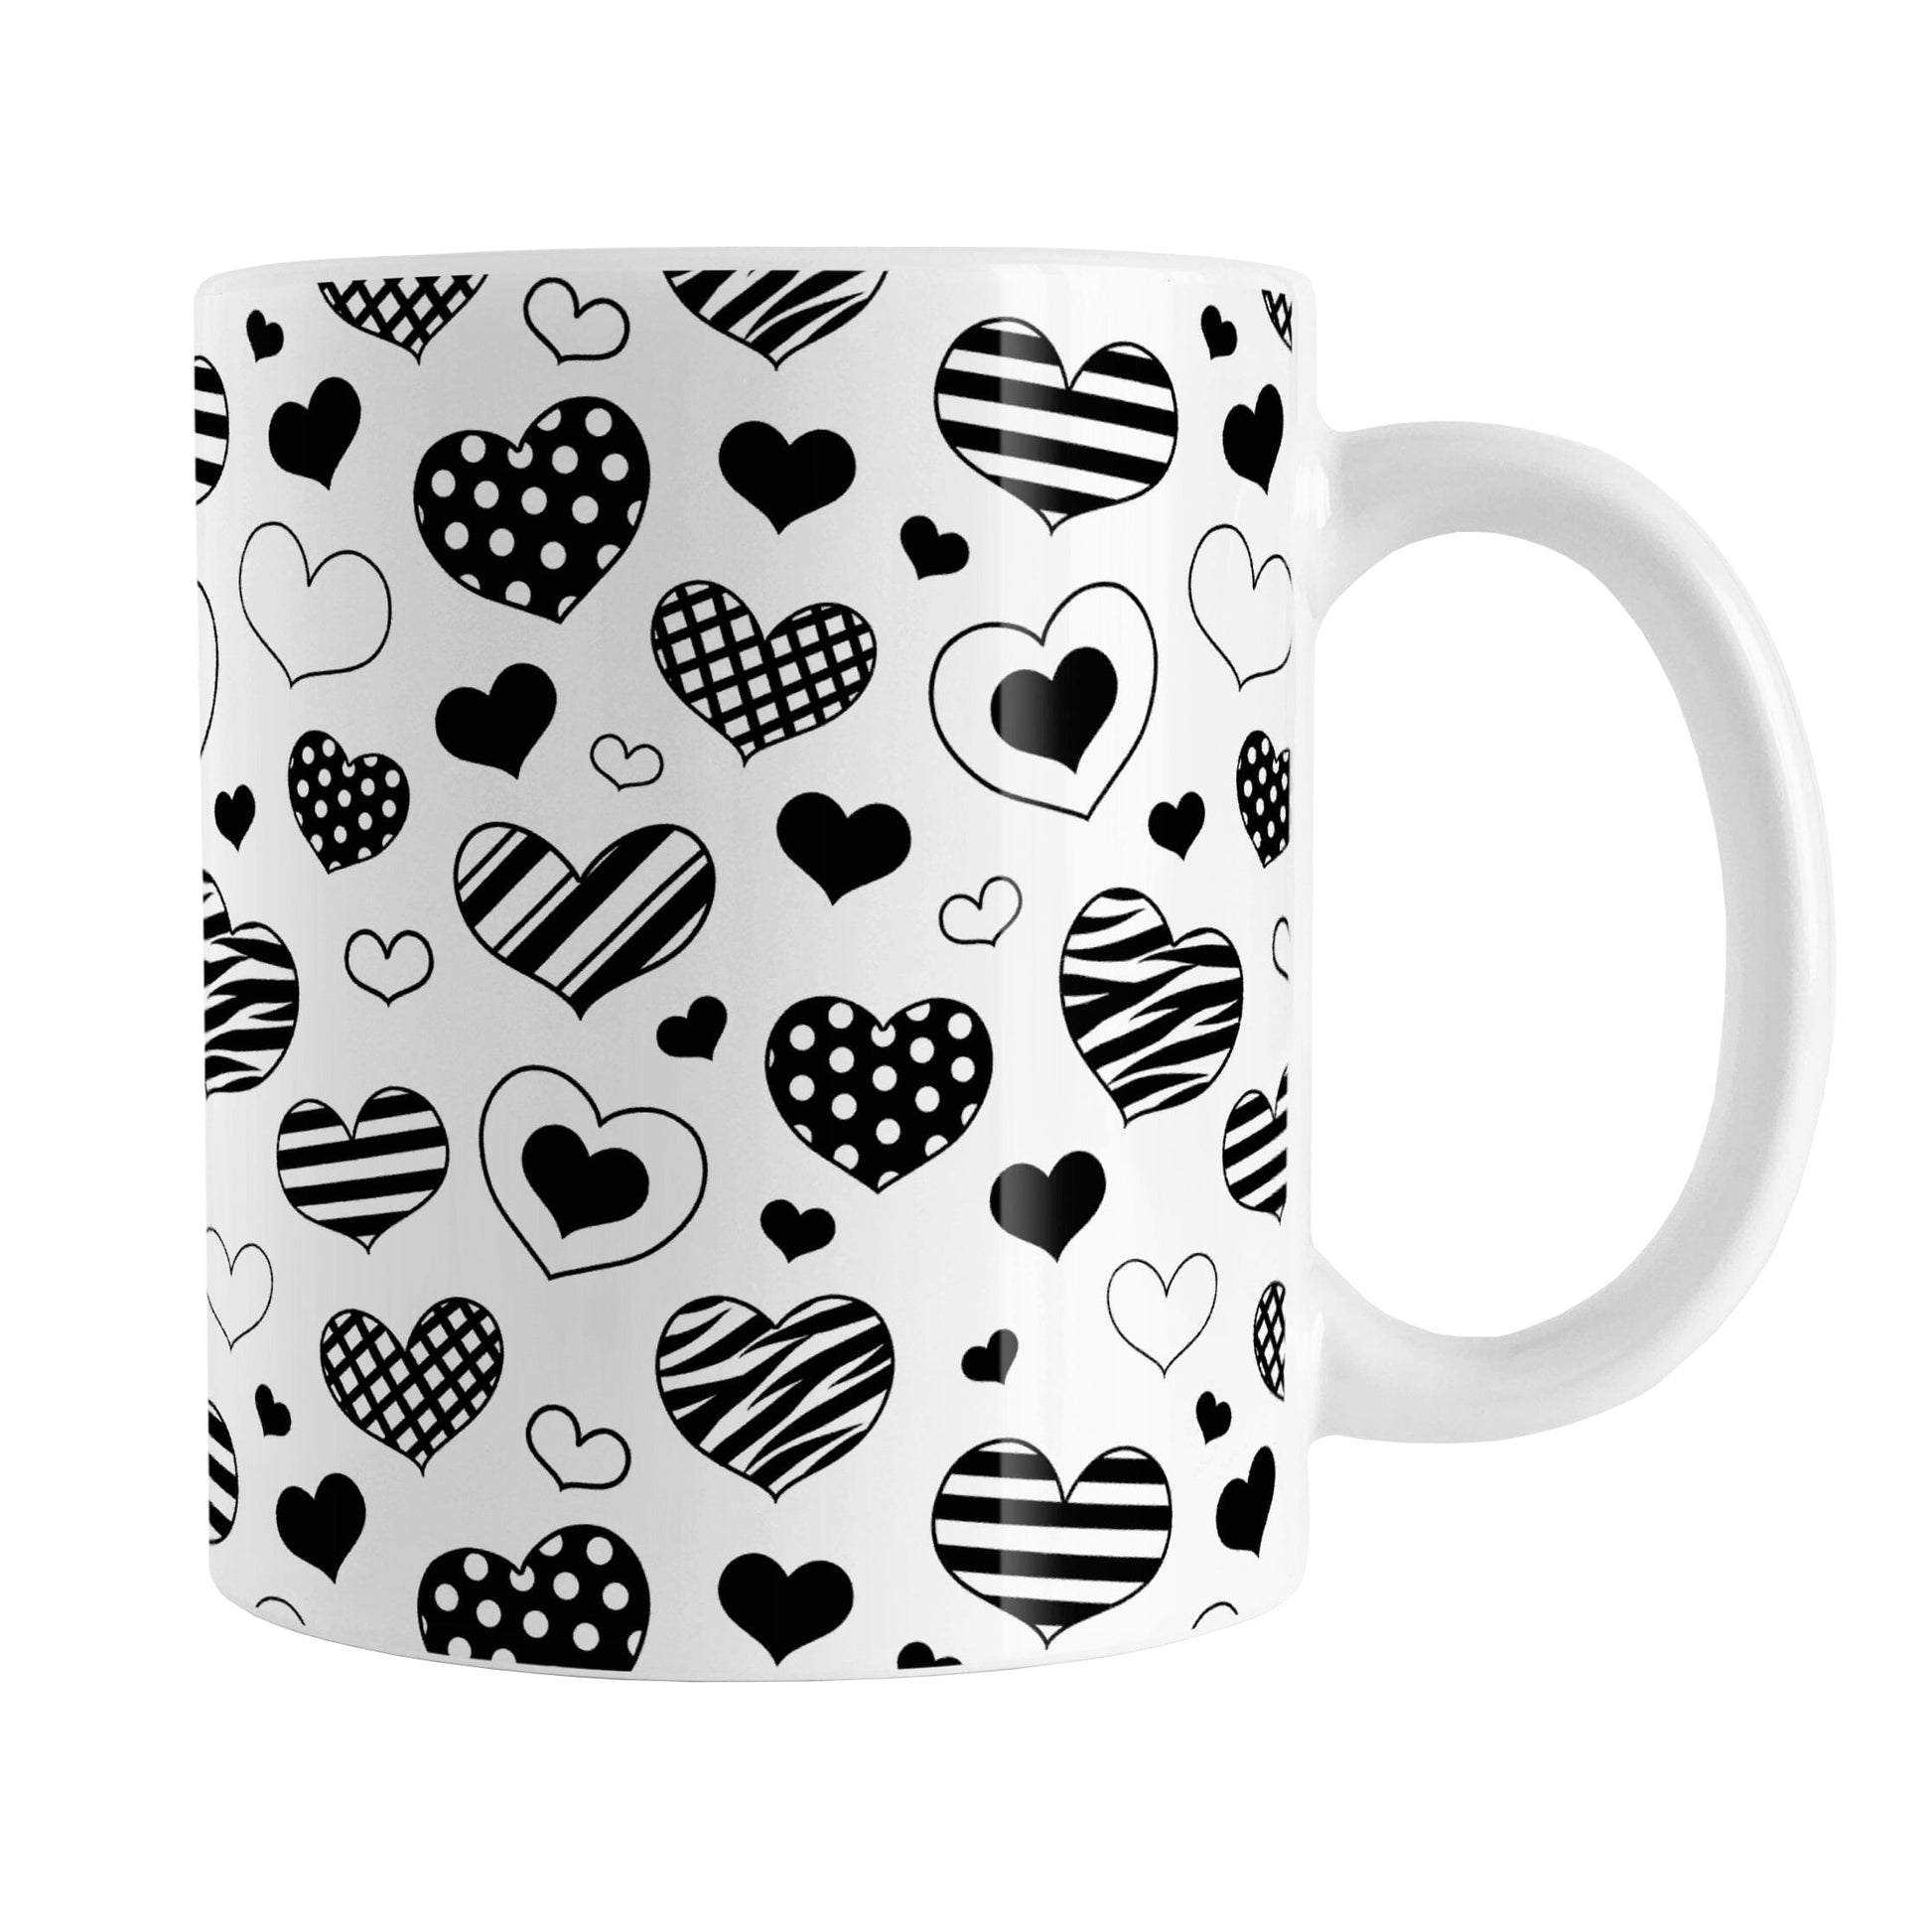 Black Heart Doodles Mug (11oz) at Amy's Coffee Mugs. A ceramic coffee mug designed with hand-drawn black heart doodles in a pattern that wraps around the cup. This cute heart pattern is perfect for Valentine's Day or for anyone who loves hearts and young-at-heart drawings. 